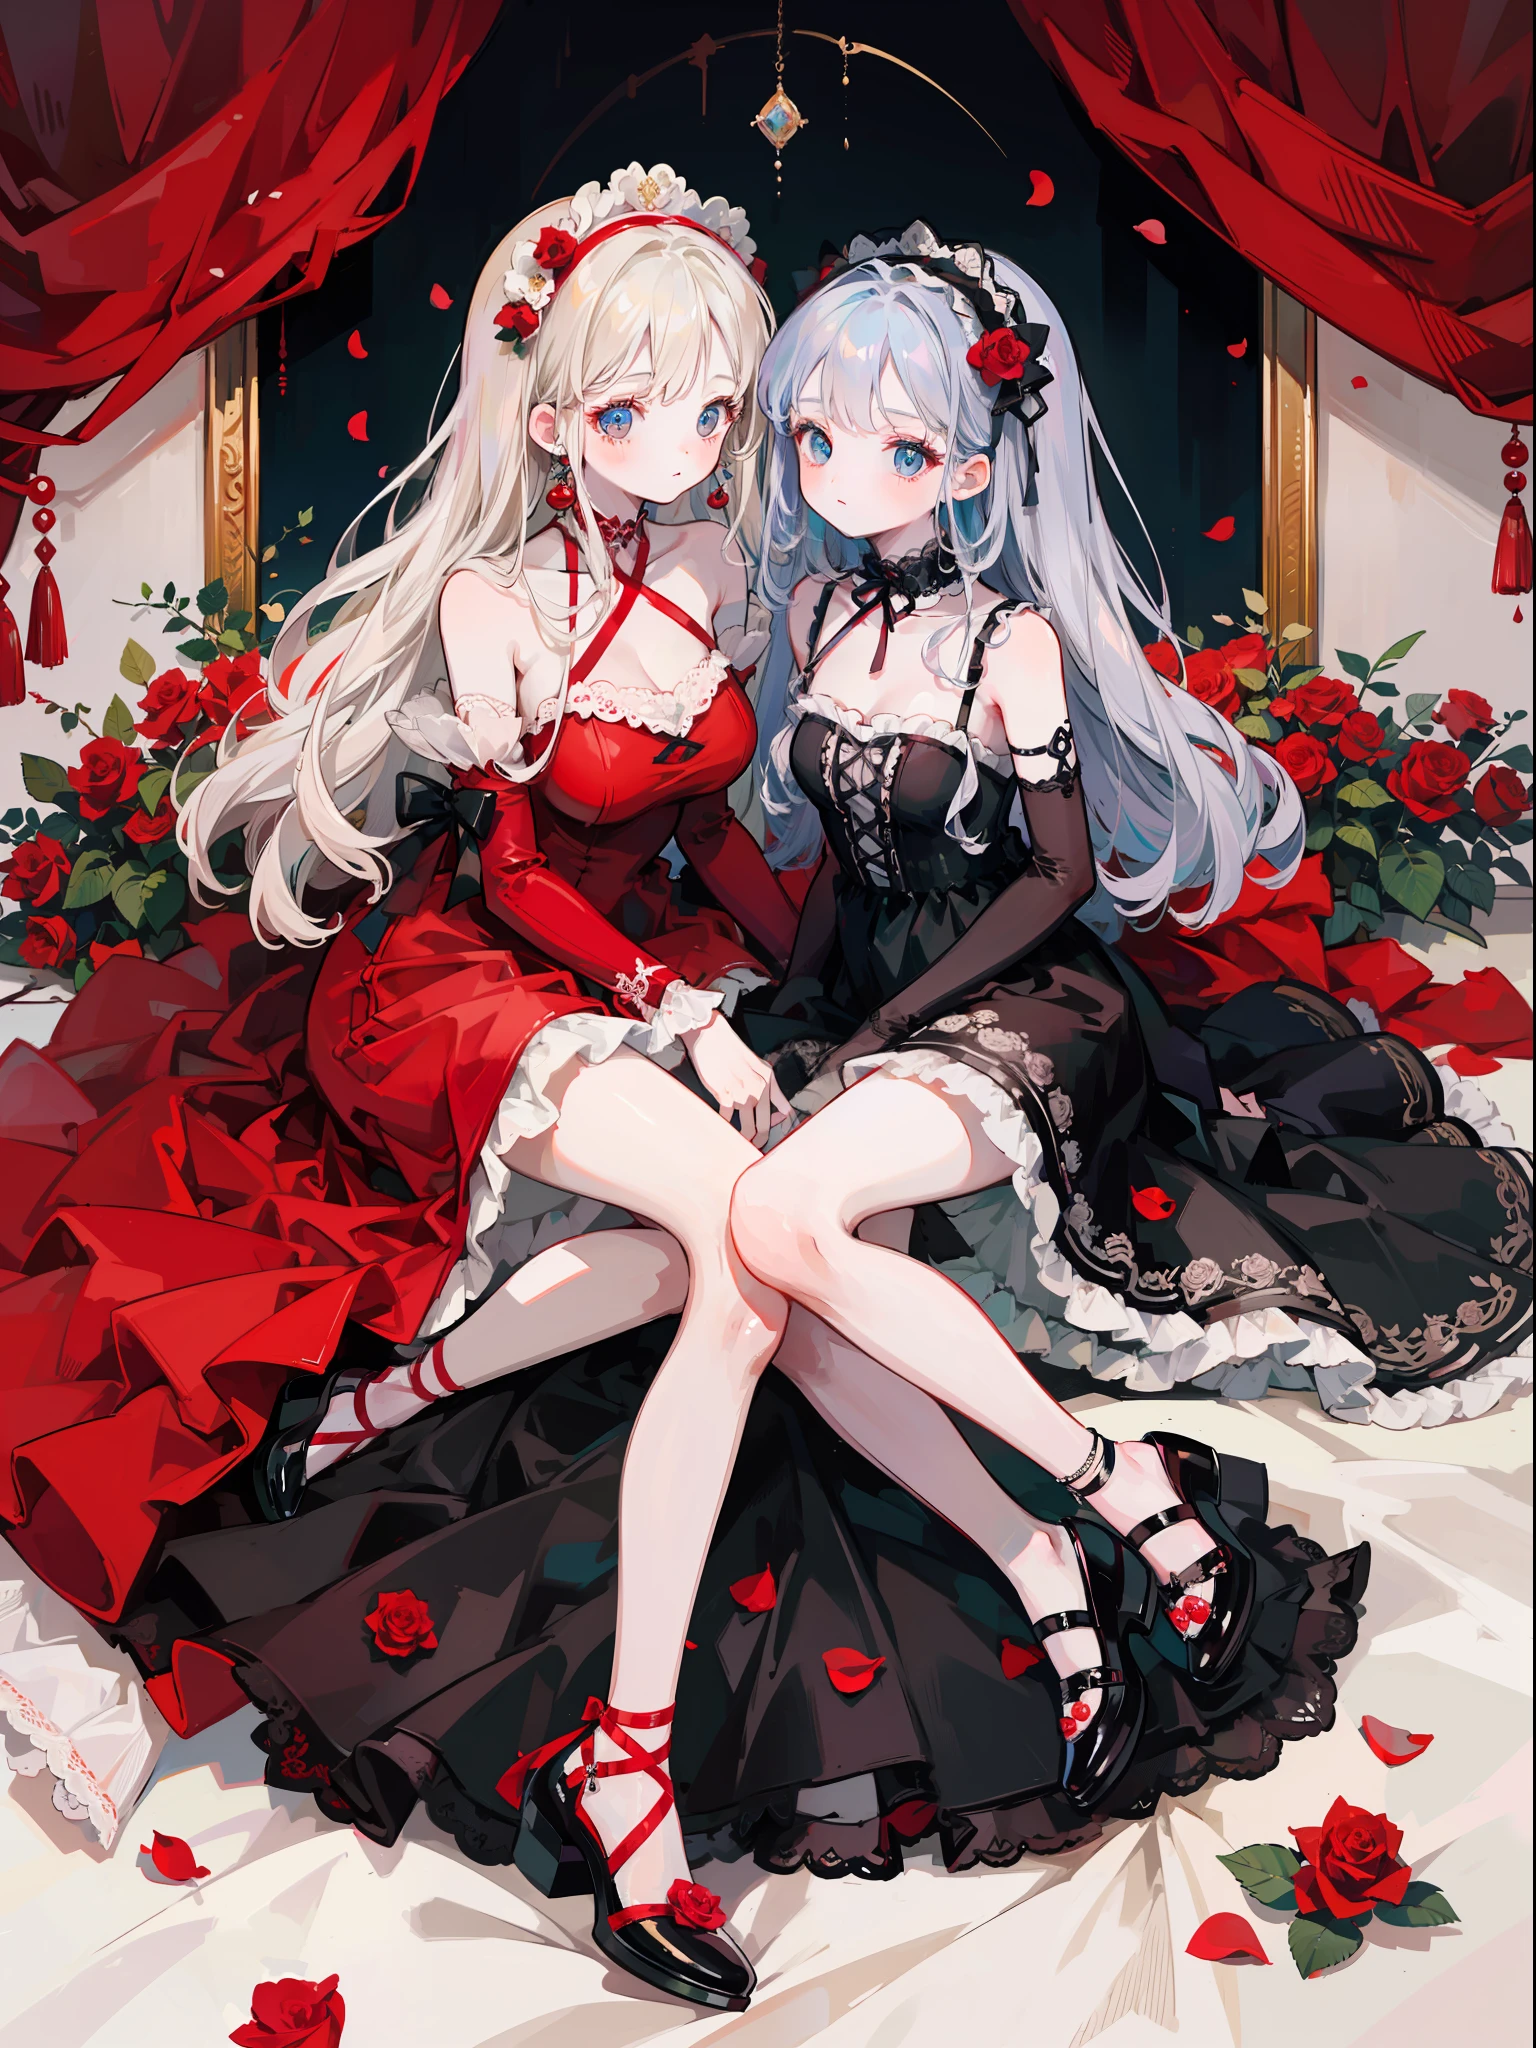 Two 3 year old girls、Rose Maiden、Two people love each other、doll、fullllbody、Lots of rose petals on the background、Impressive eyes、Lashes、lower eyelashes、Delicate lace、Delicate frills、Beautiful Gothic Dresses、Red roses in the background、Arrangement with Sense、Extremely high quality、high-level image quality、Extremely delicate drawing